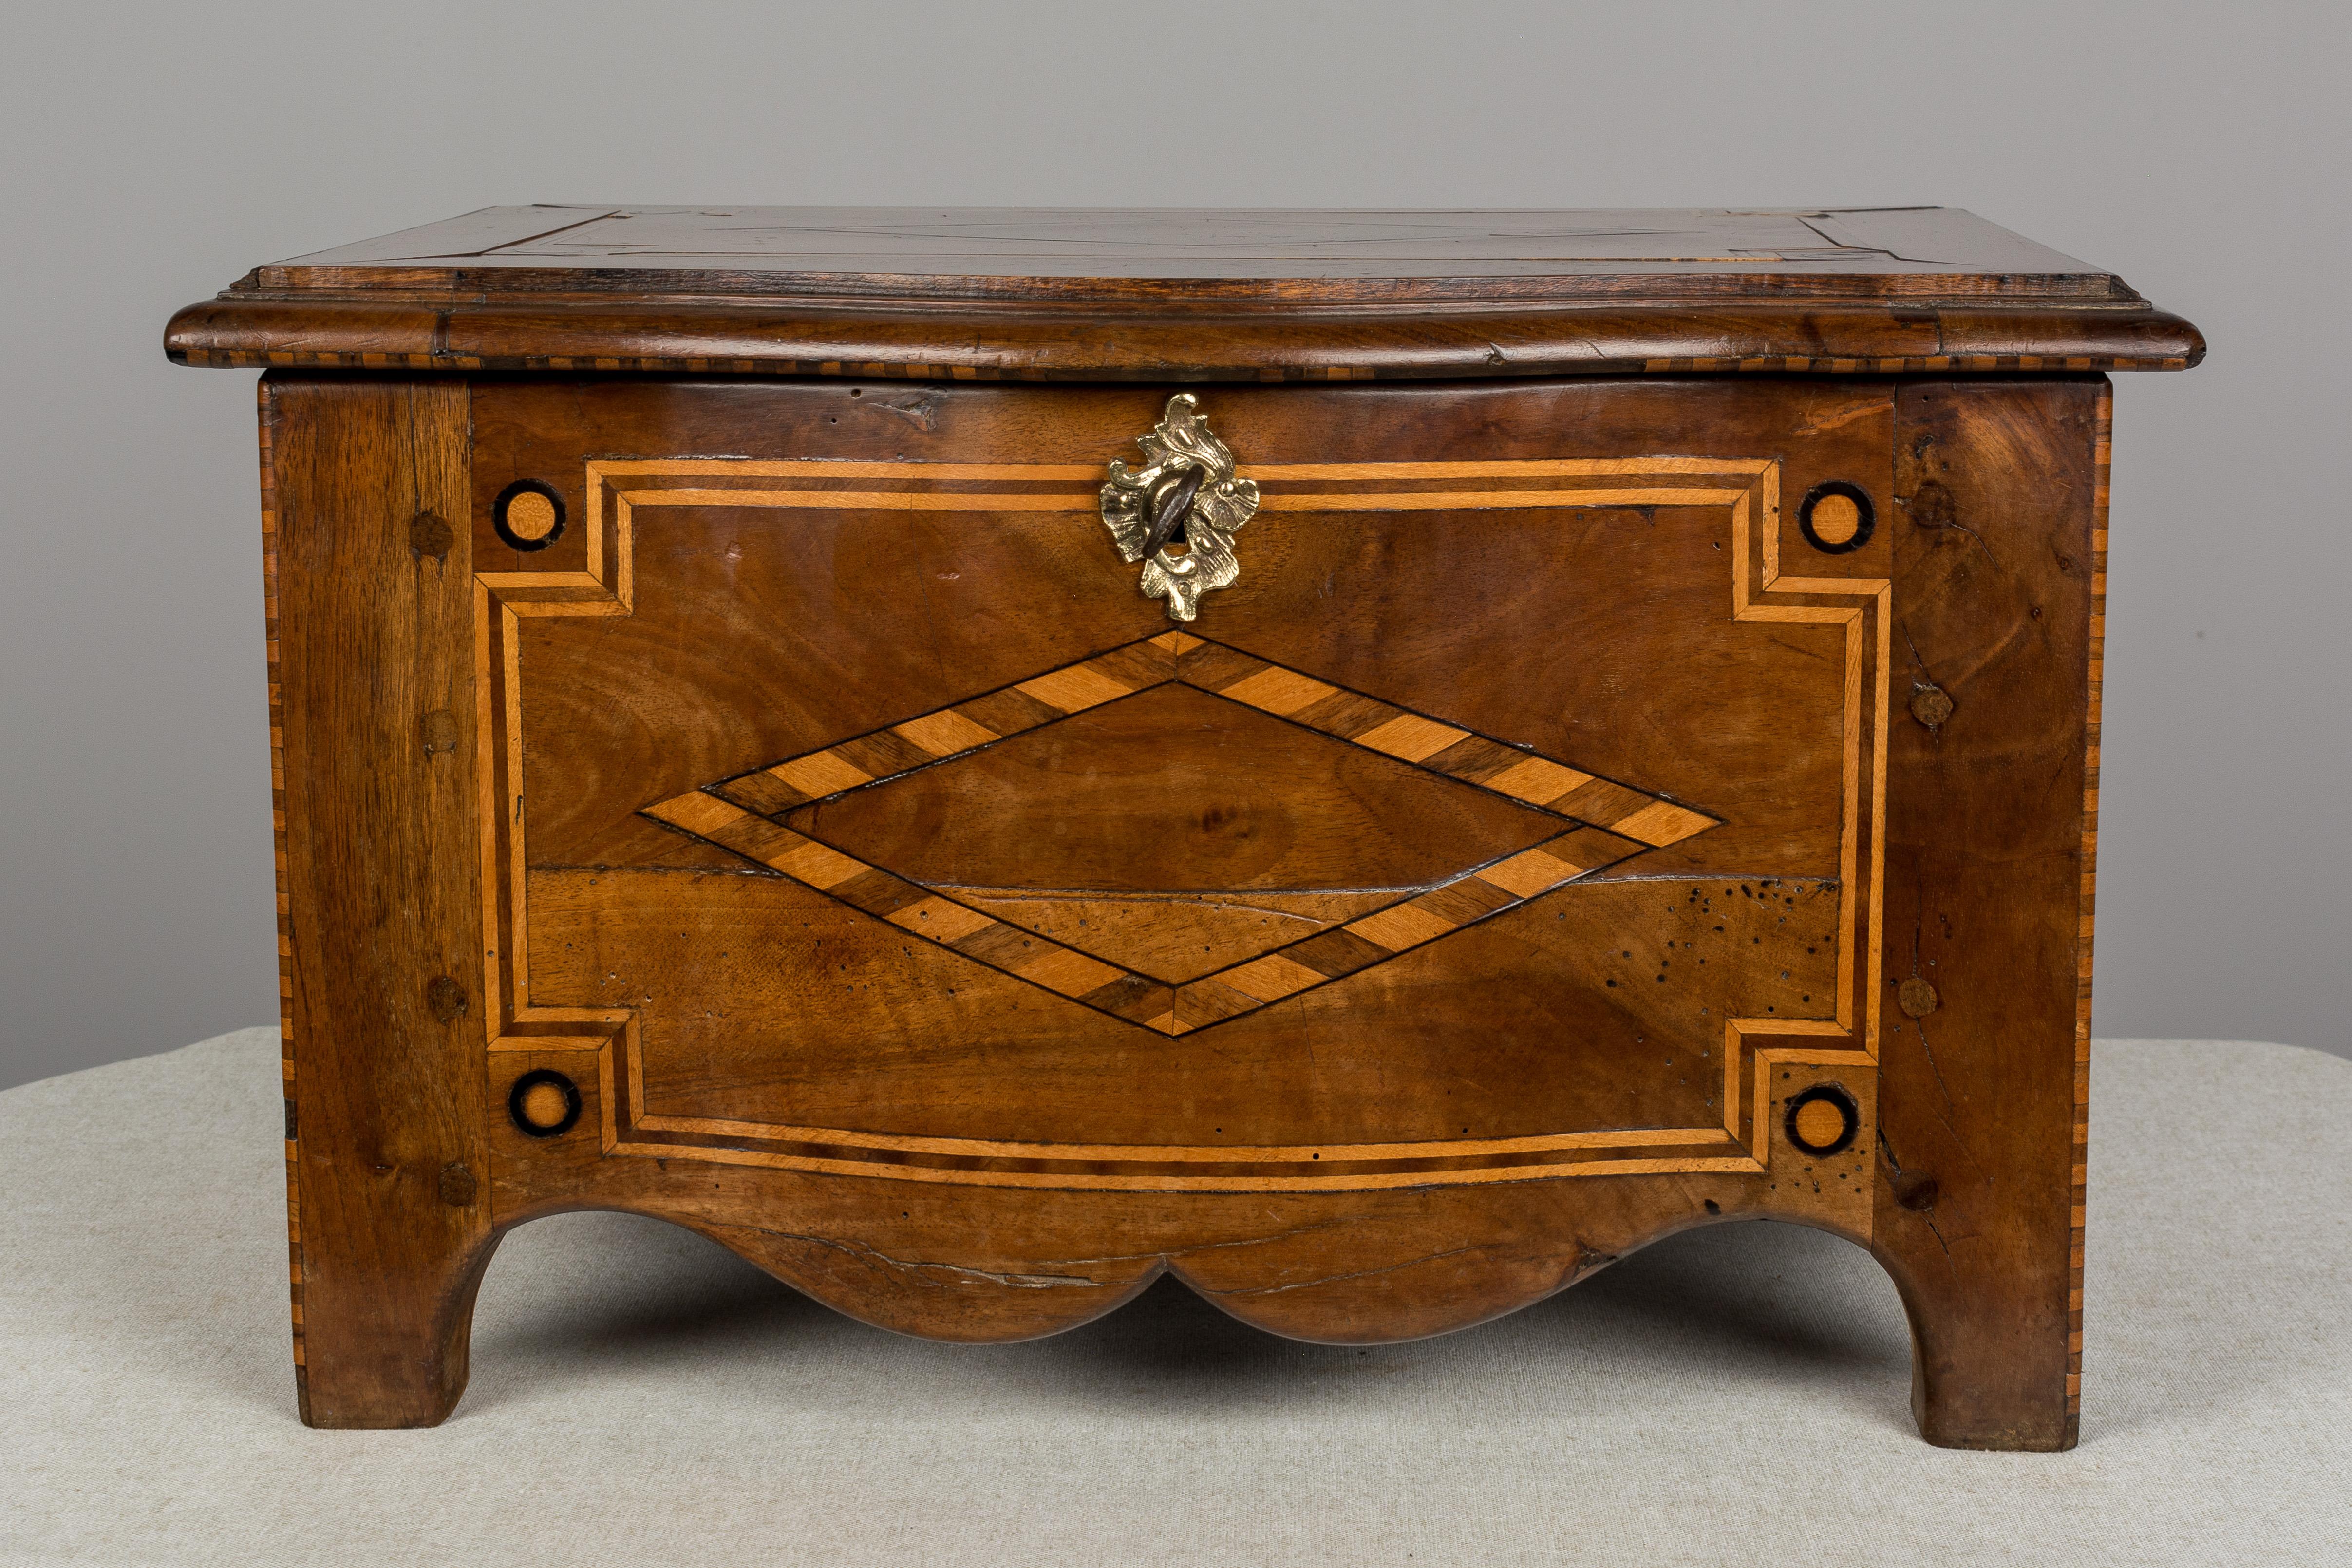 An early 19th century miniature French coffer, or small hinged box, made of solid walnut with marquetry inlay. Original decorative bronze hardware and large iron hinges. Working lock and key. Three stacking trays for storing silverware were